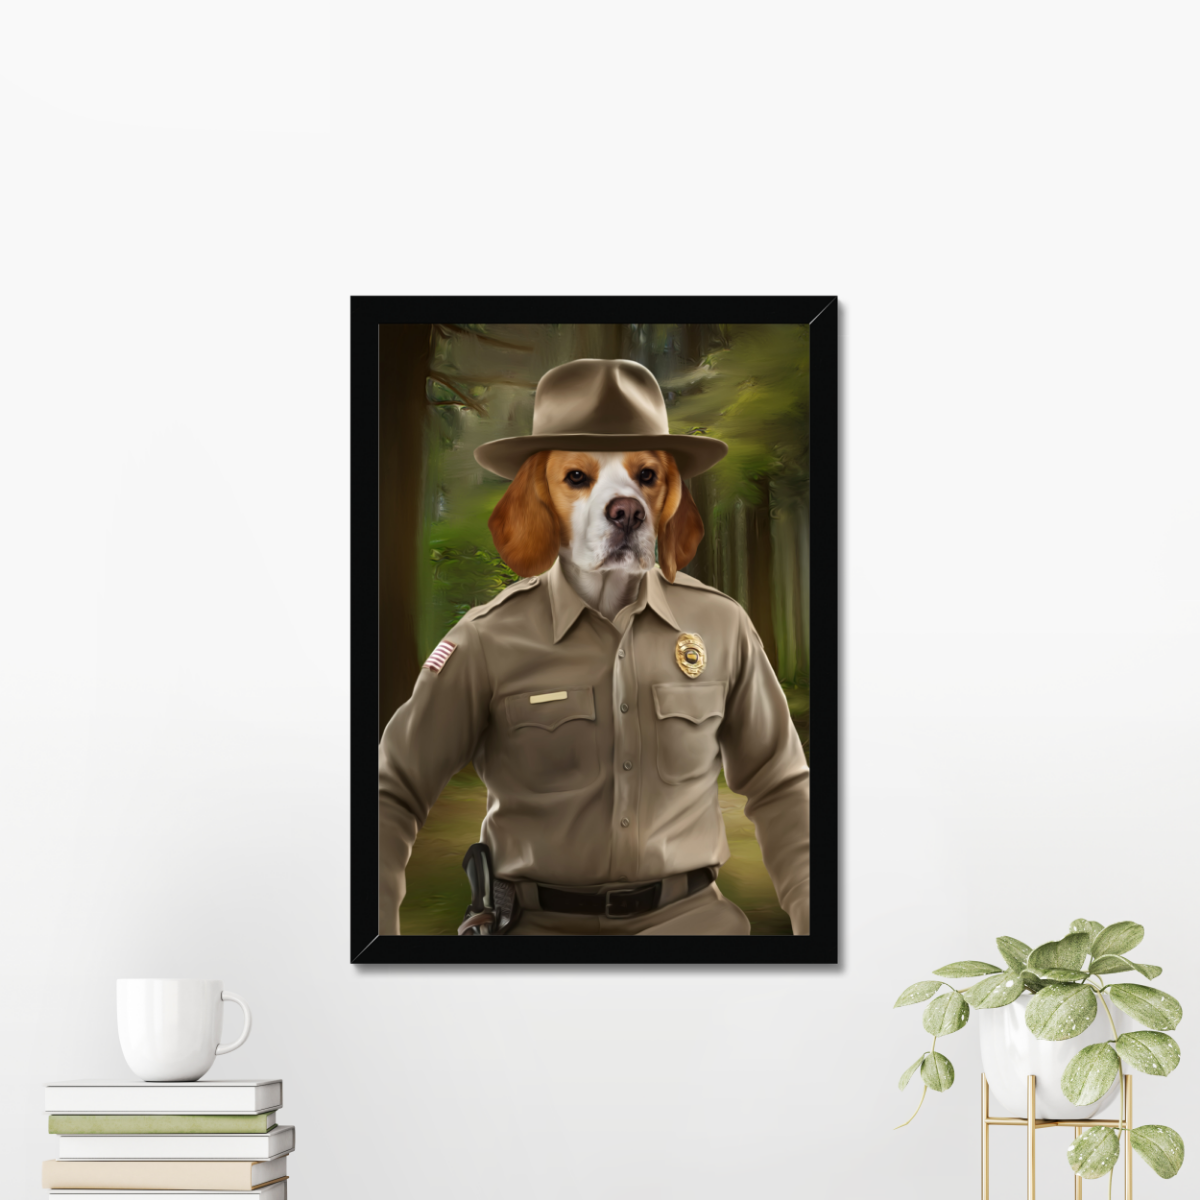 Hopper (Stranger Things Inspired): Custom Pet Portrait - Paw & Glory, paw and glory, hogwarts dog houses, draw your pet portrait, pictures for pets, paintings of pets from photos, custom pet portraits south africa, pet portraits black and white, pet portraits